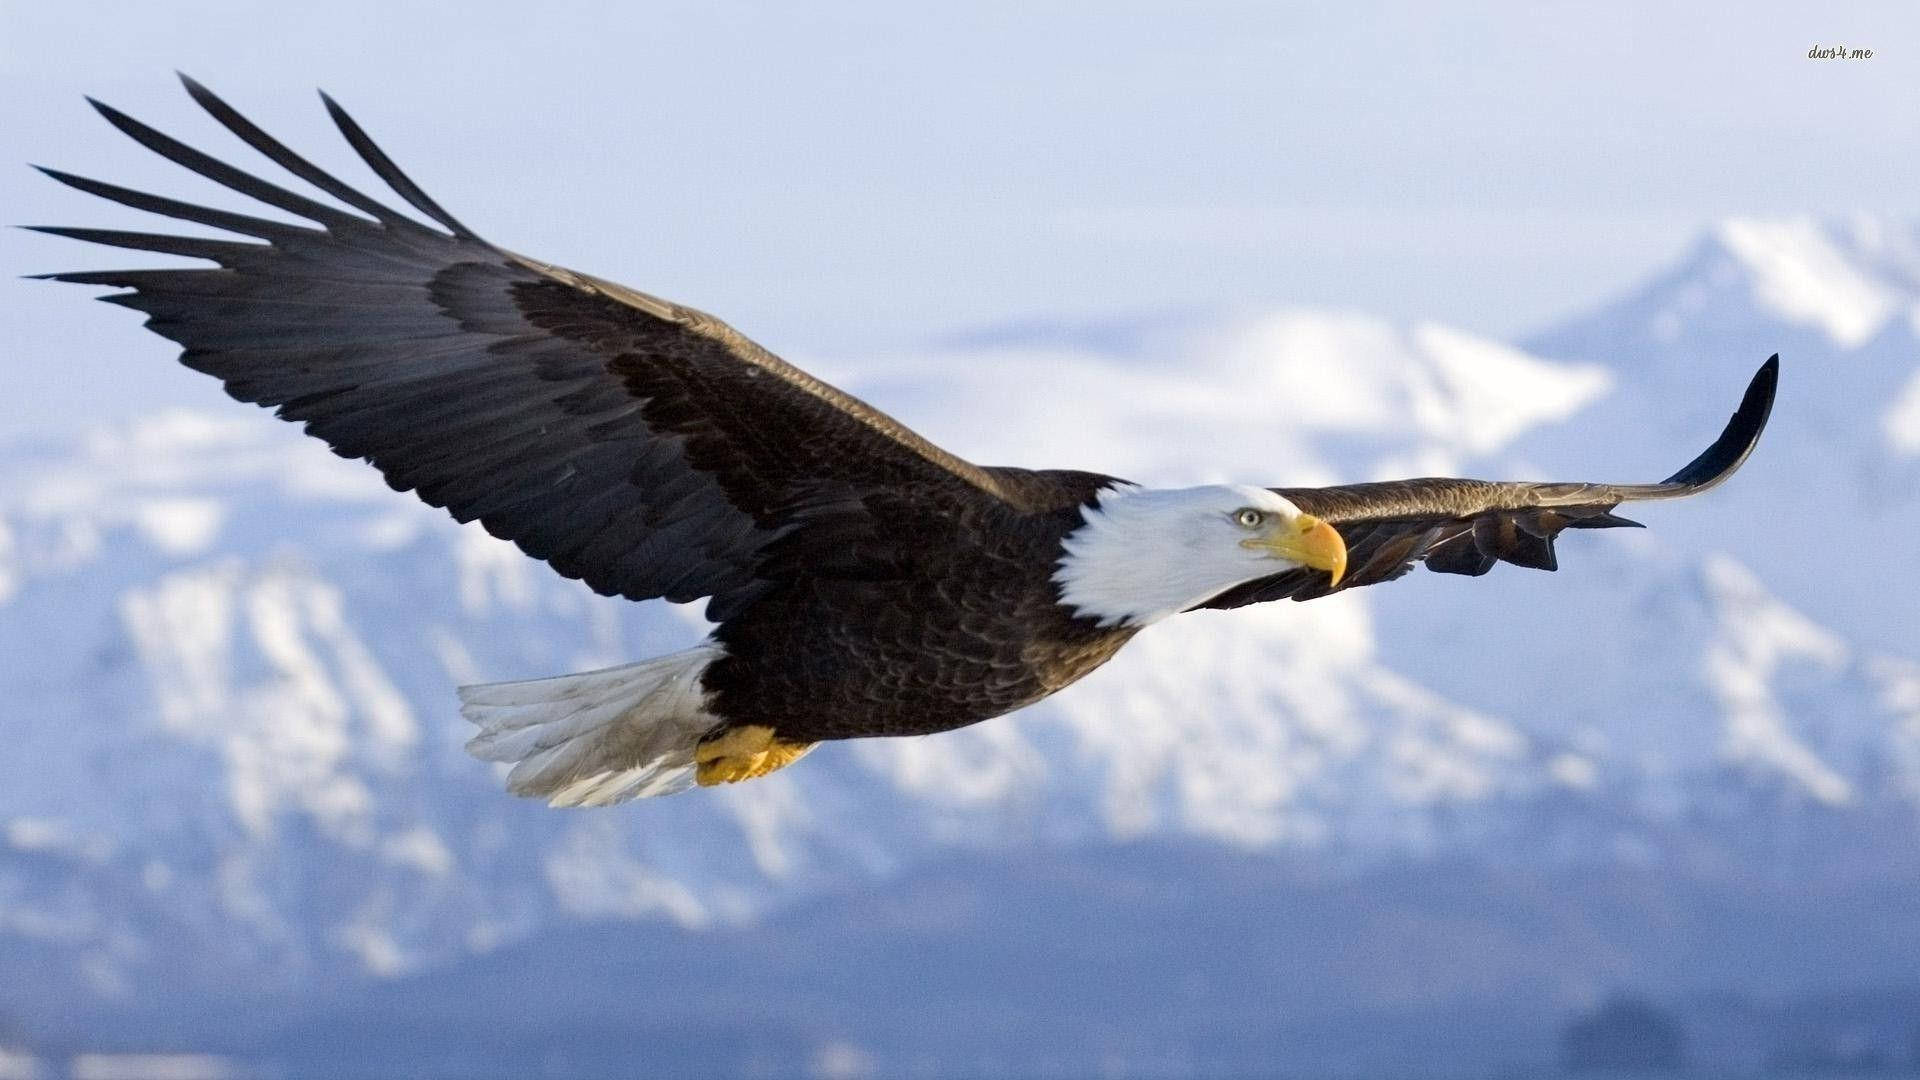 Free Bald Eagle Wallpaper Downloads, [100+] Bald Eagle Wallpapers for FREE  